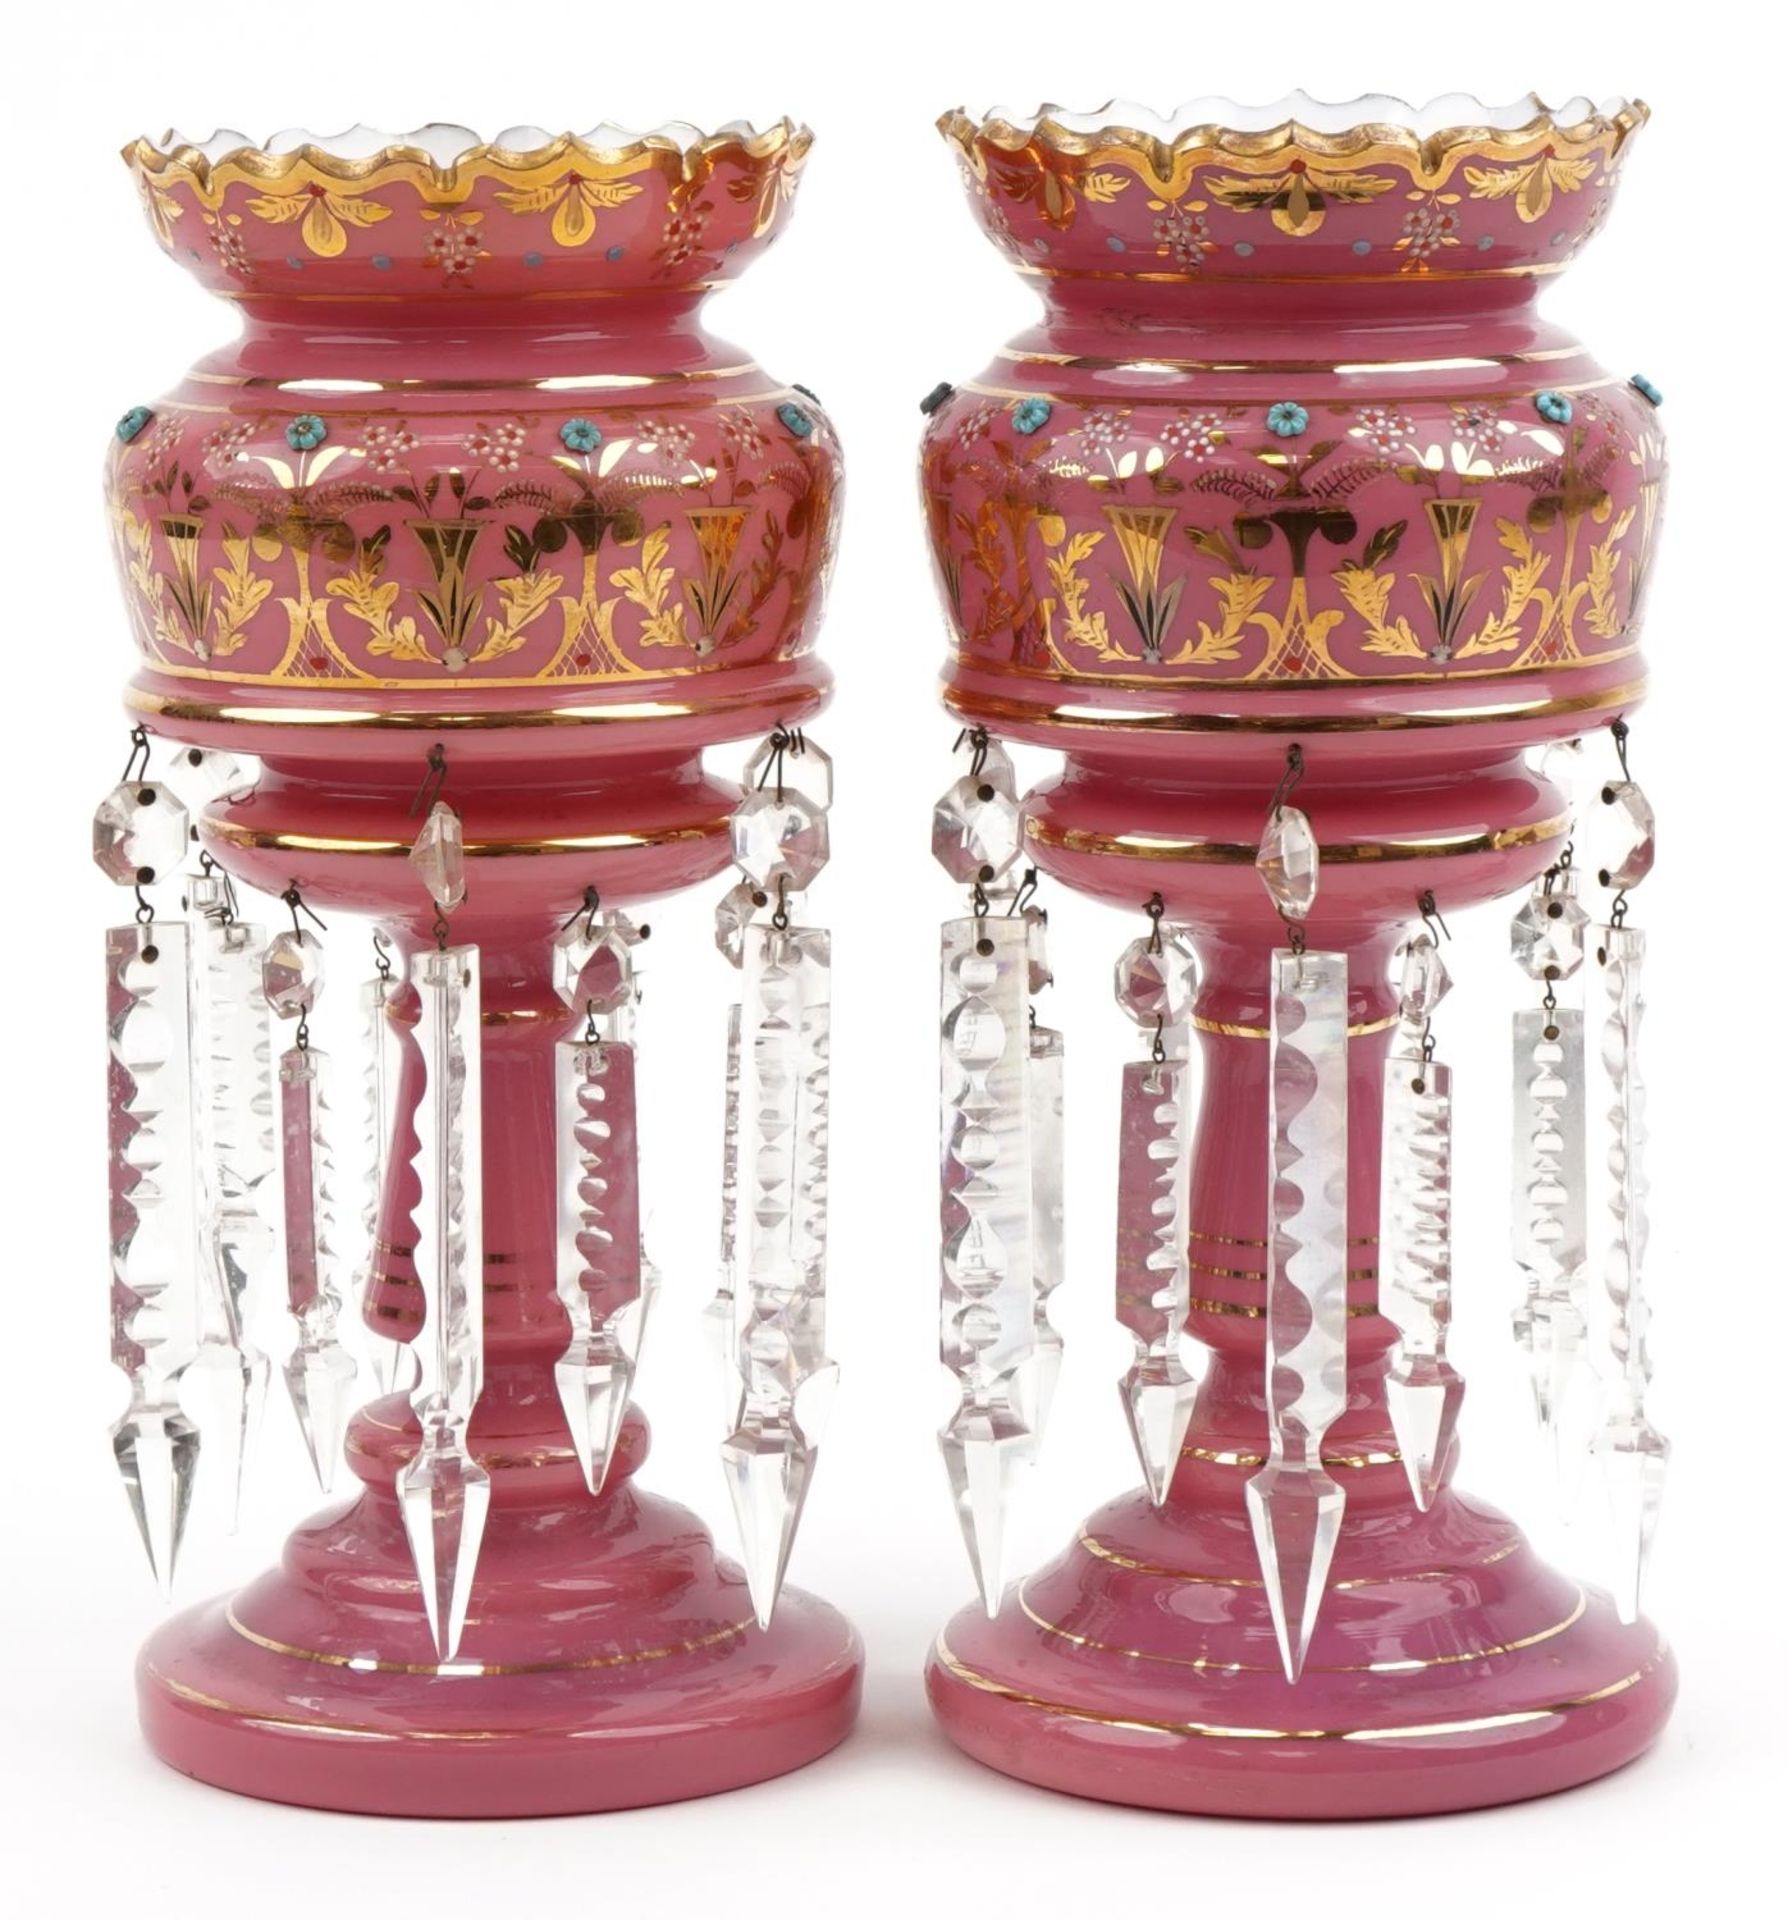 Pair of 19th century pink opaline glass lustres with drops enamelled and gilded with flowers, each